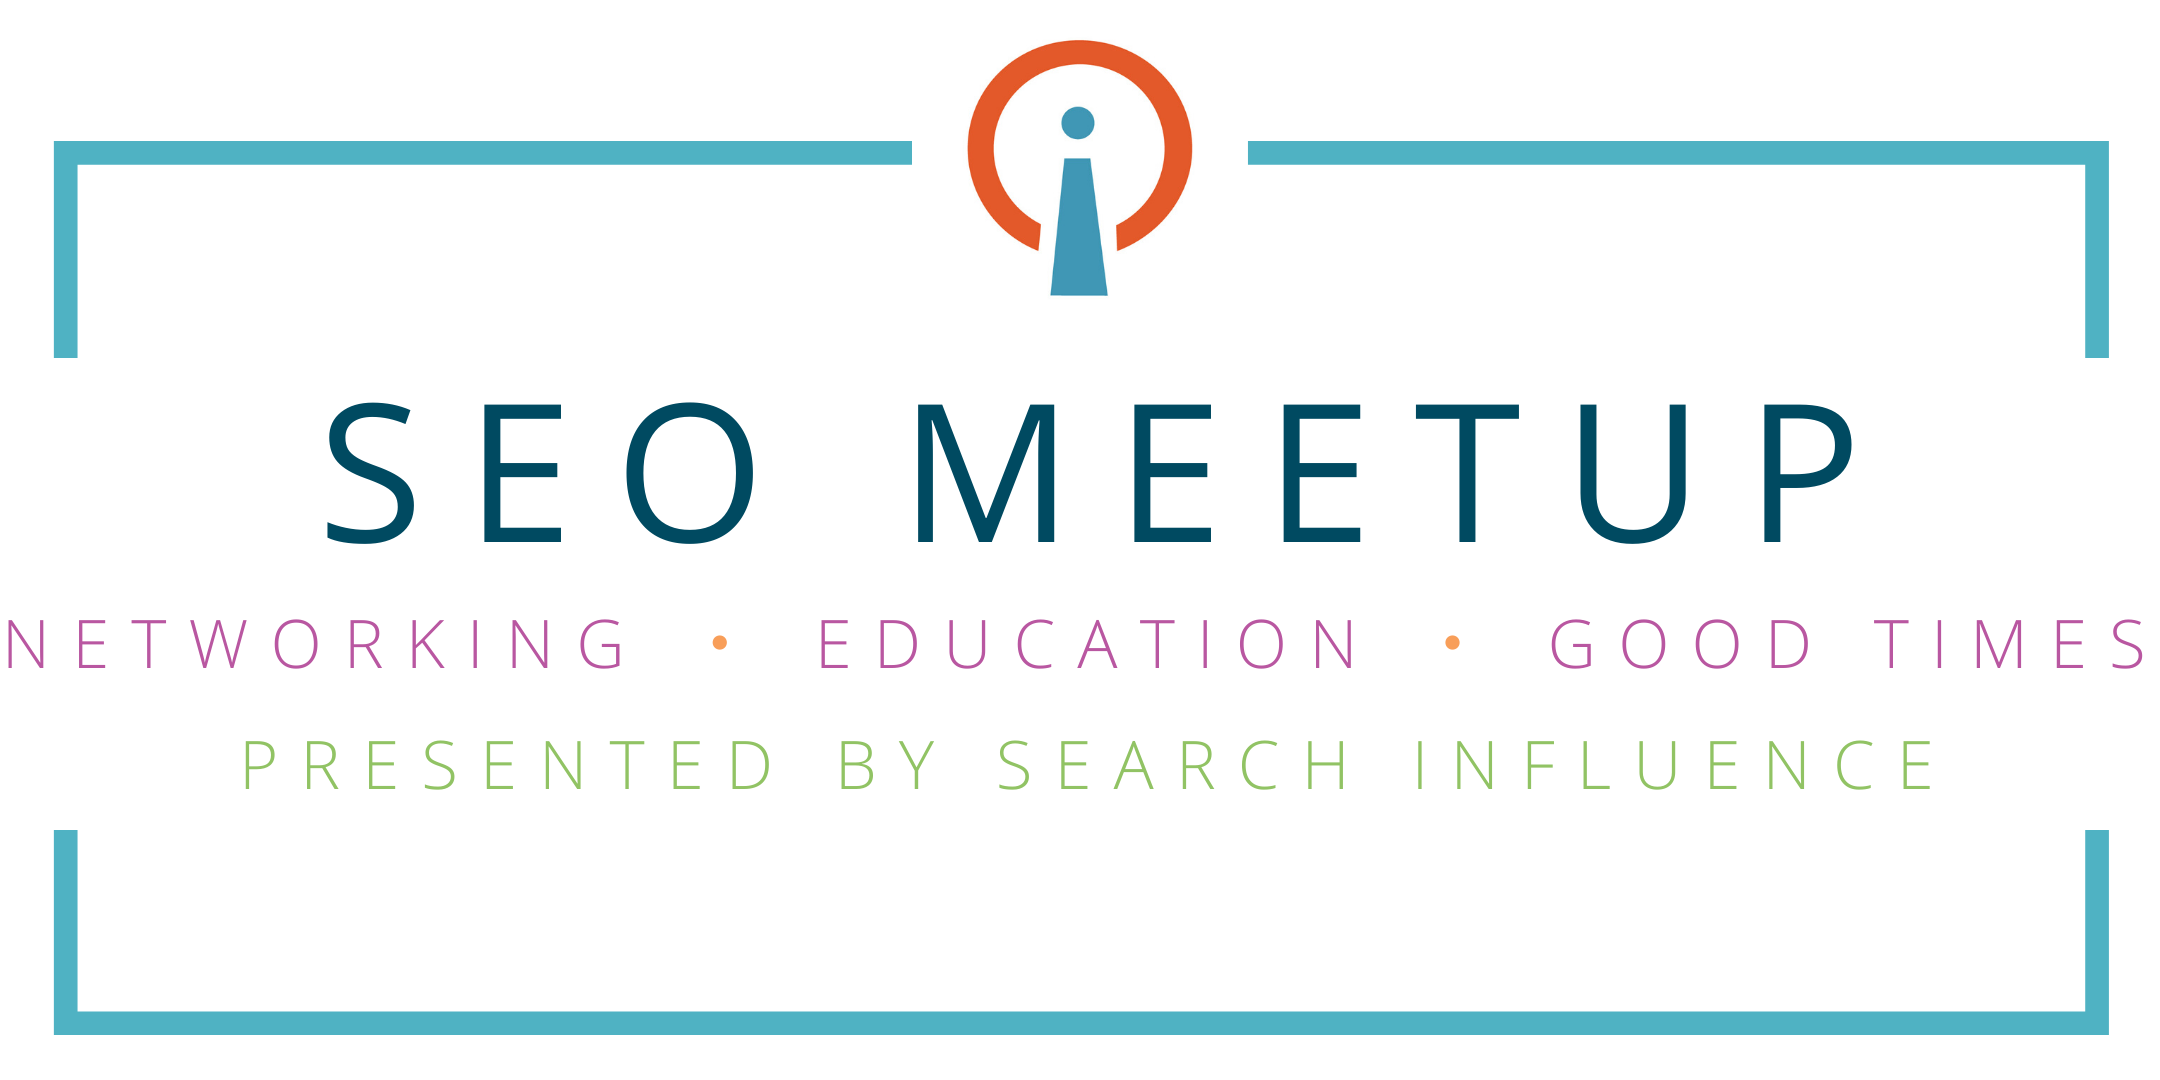 New Orleans SEO (Search Engine Optimization) Meetup